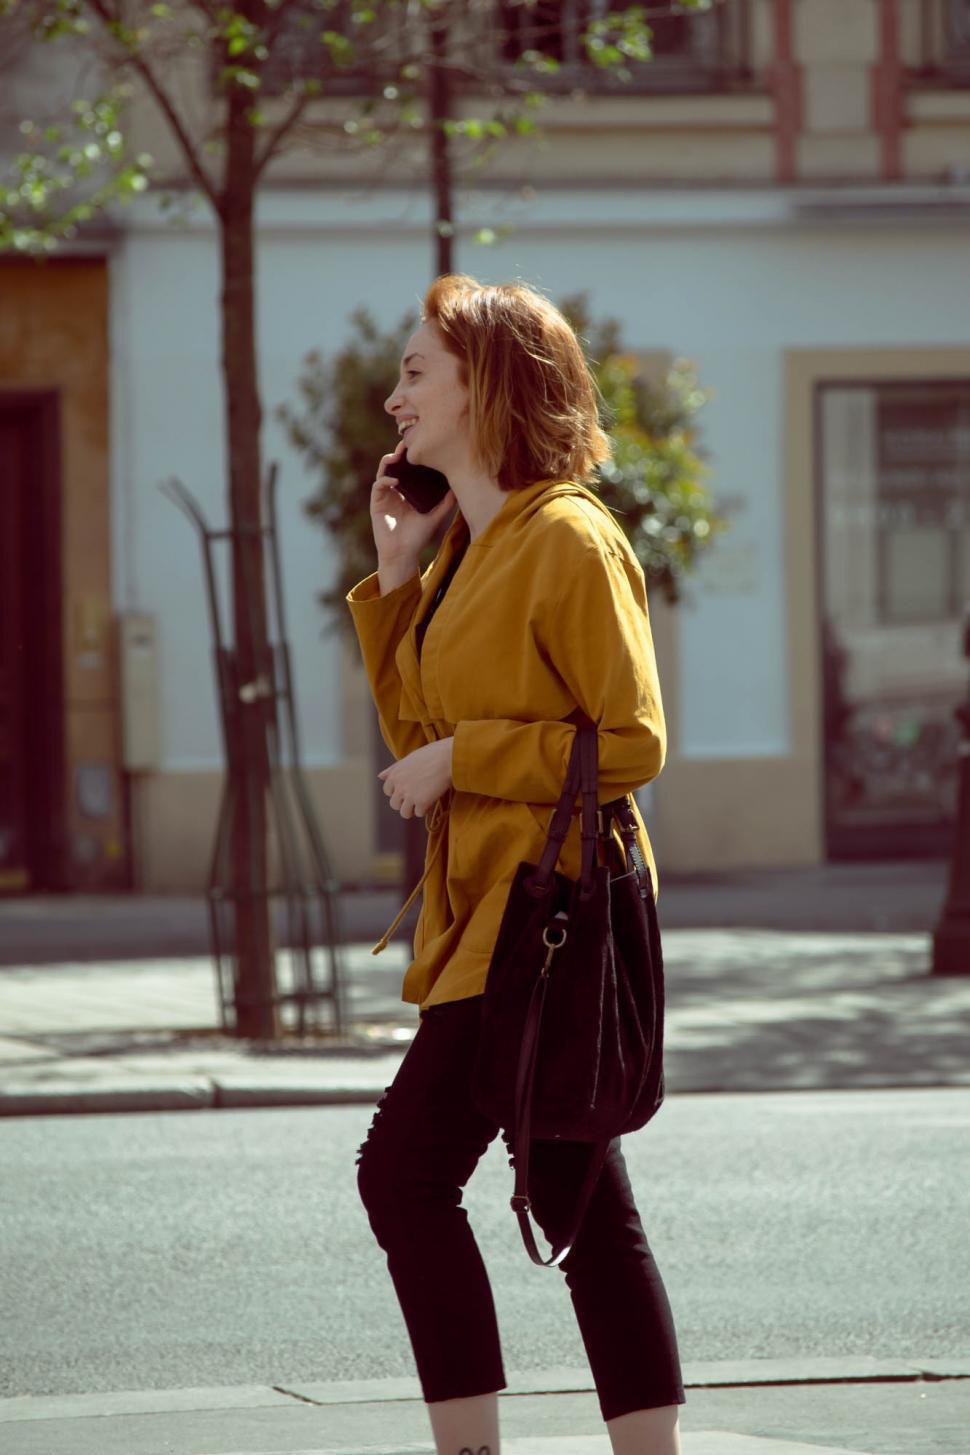 Free Image of Smiling woman talking on mobile phone on the street 